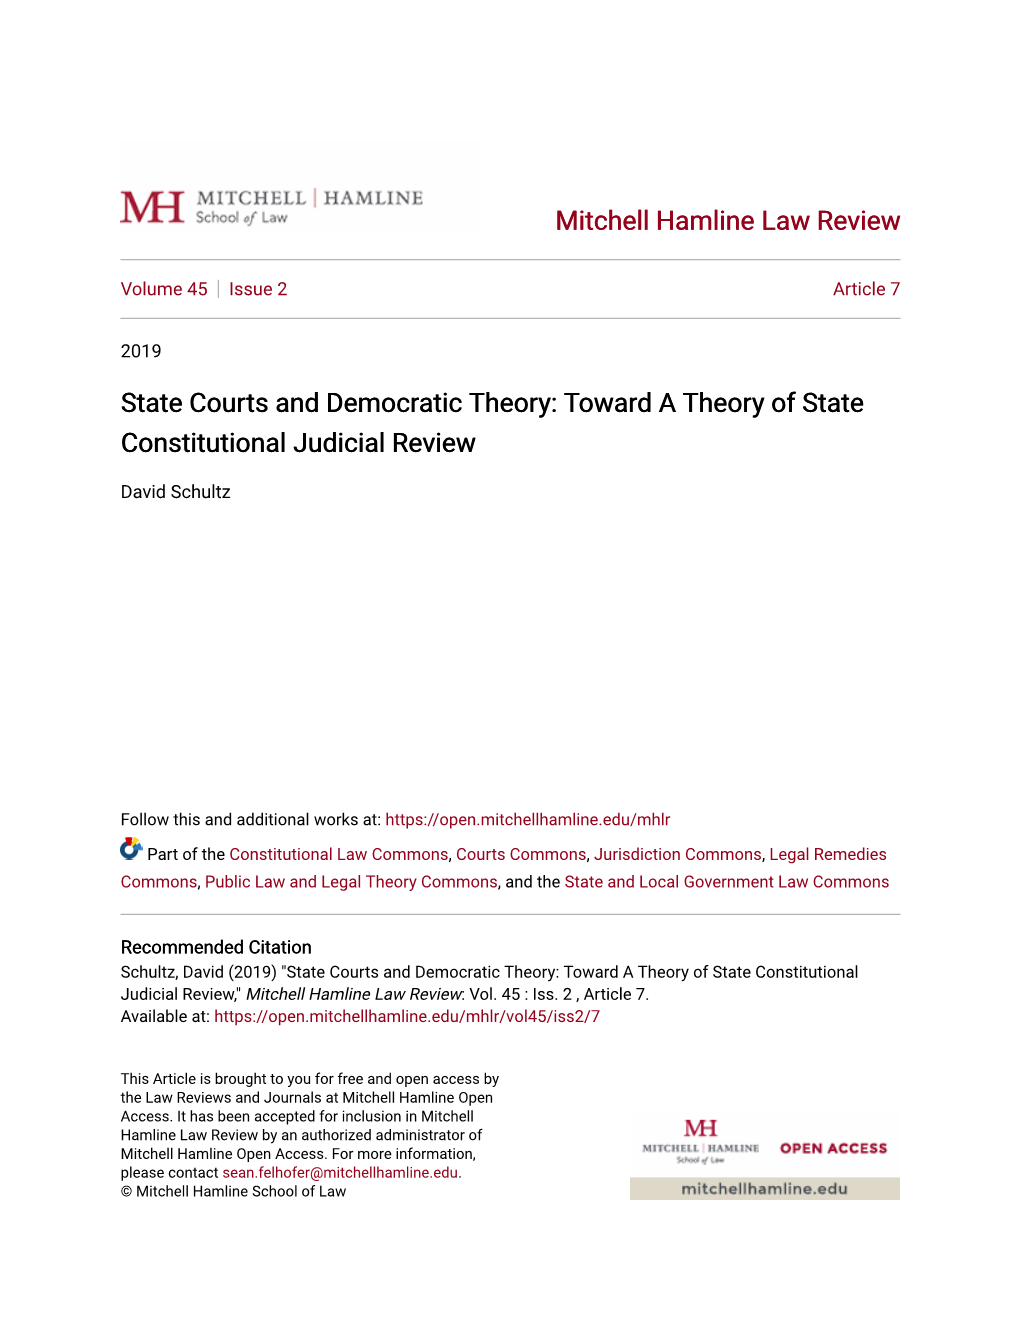 Toward a Theory of State Constitutional Judicial Review